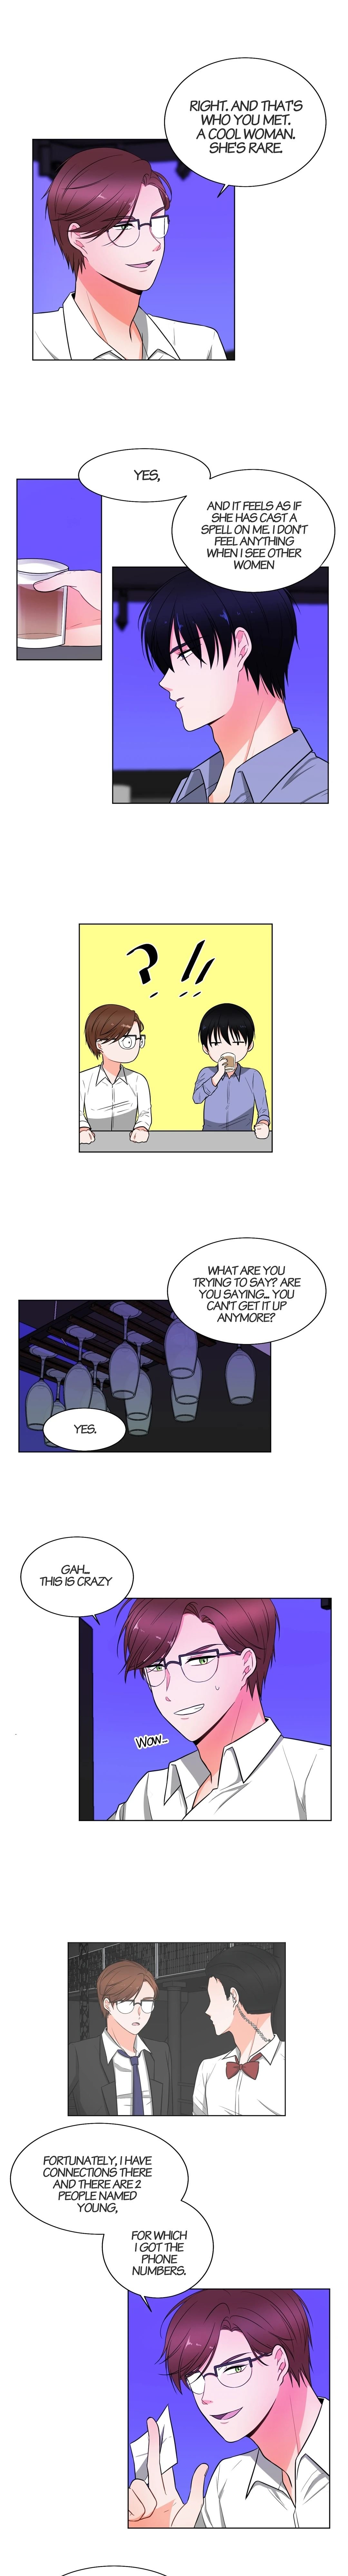 deep-and-distant-chap-4-8